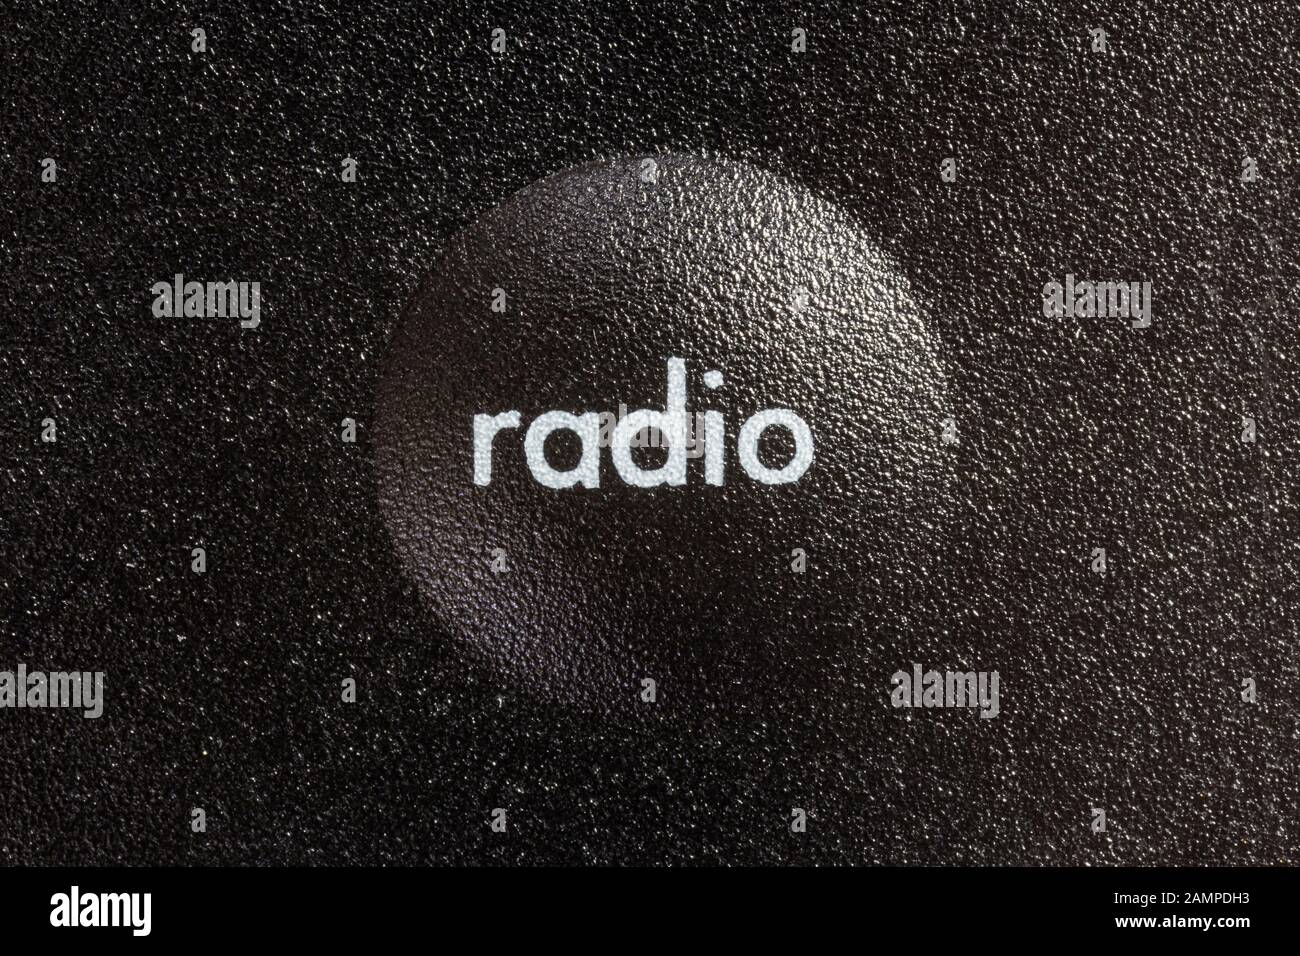 Macro close up photograph of radio selection button on remote controller. Stock Photo